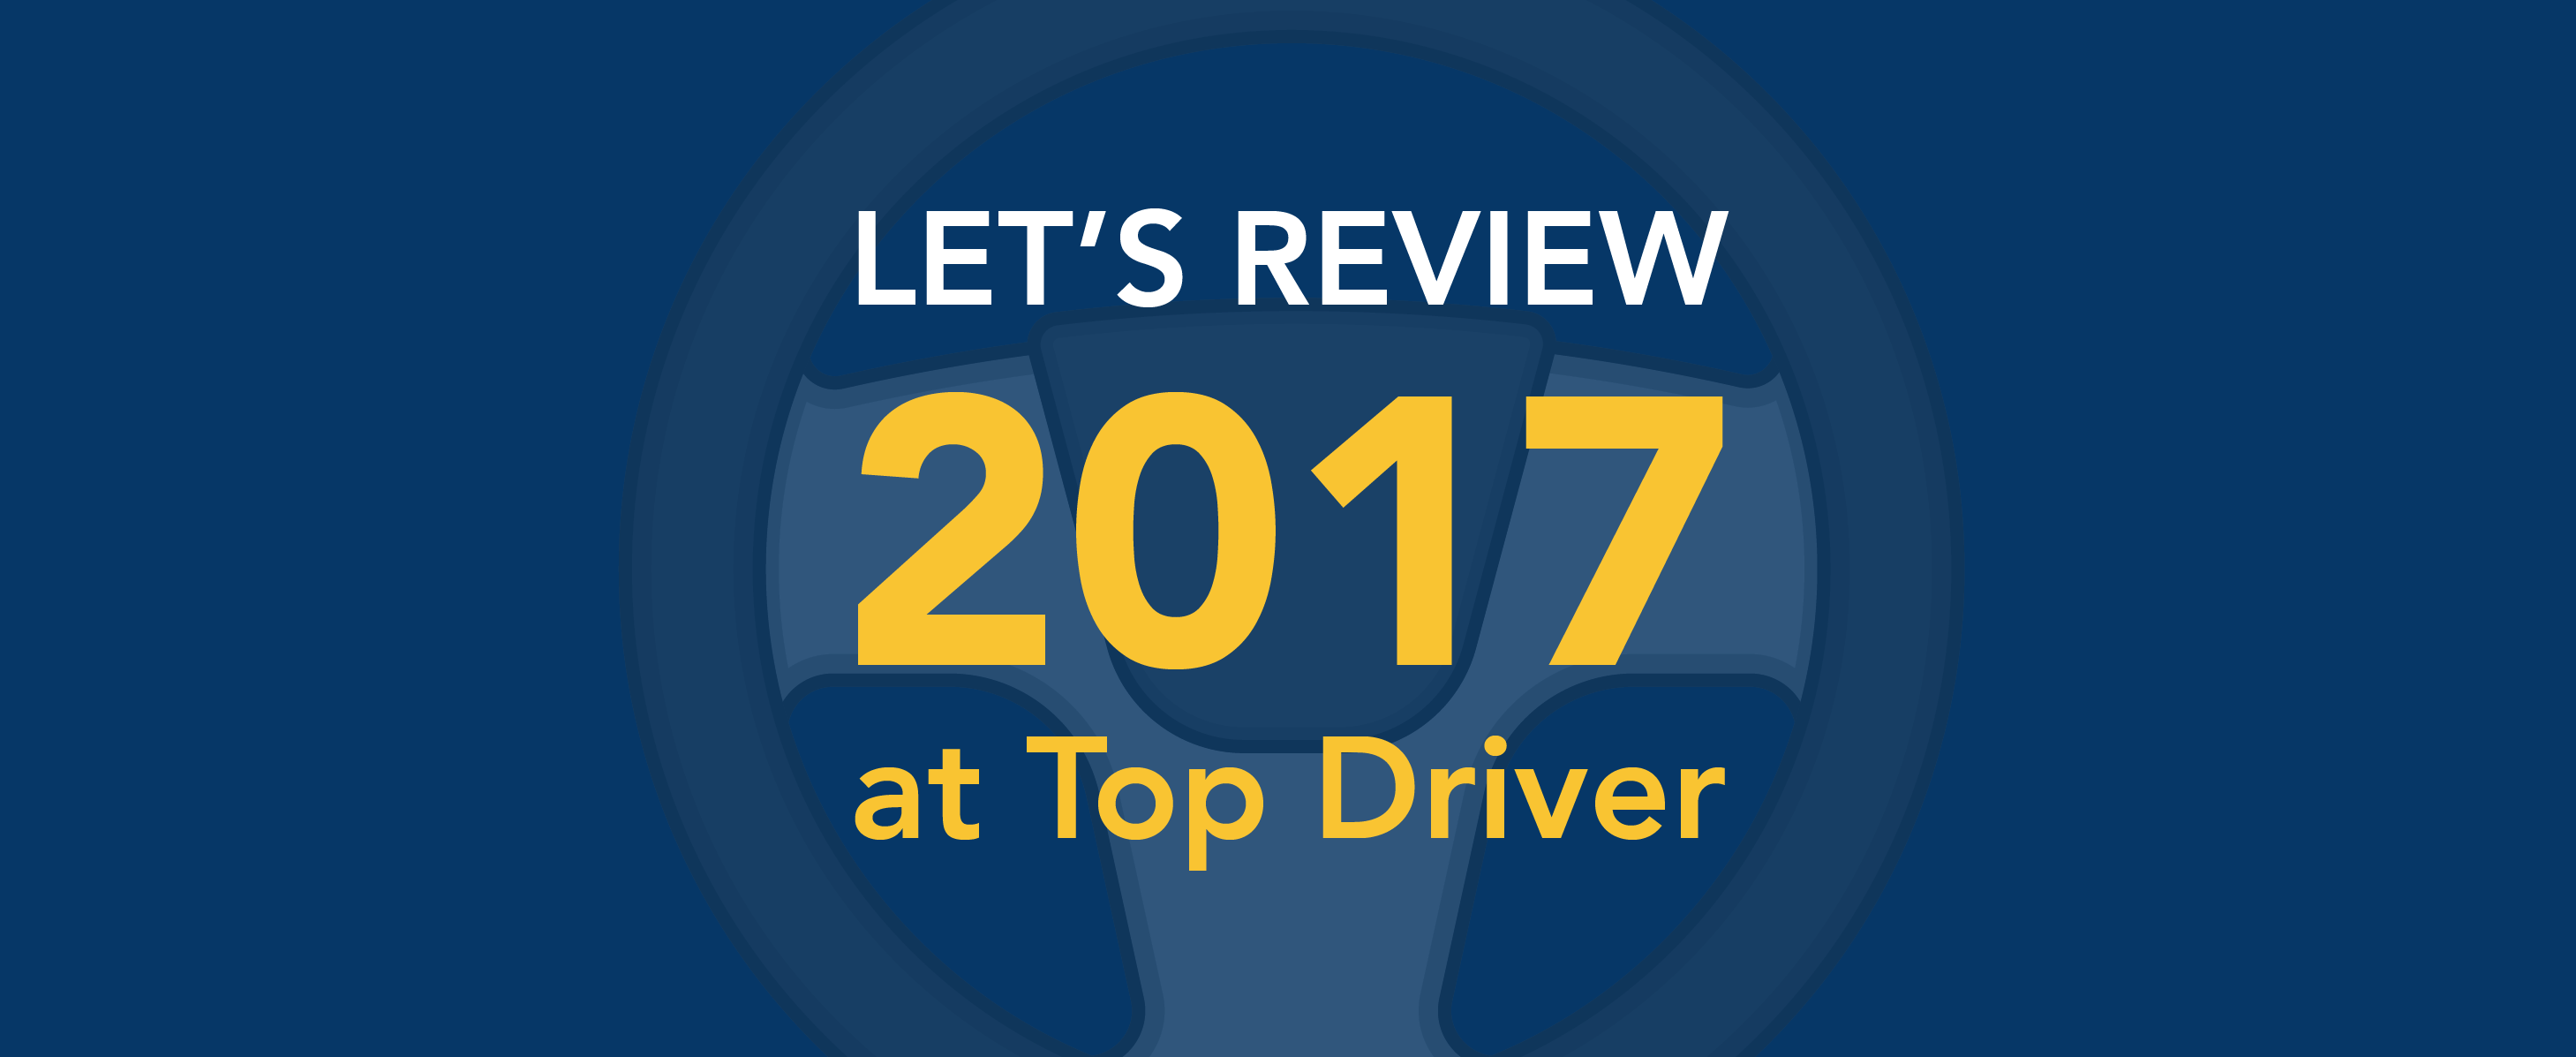 Let's review 2017 at Top Driver